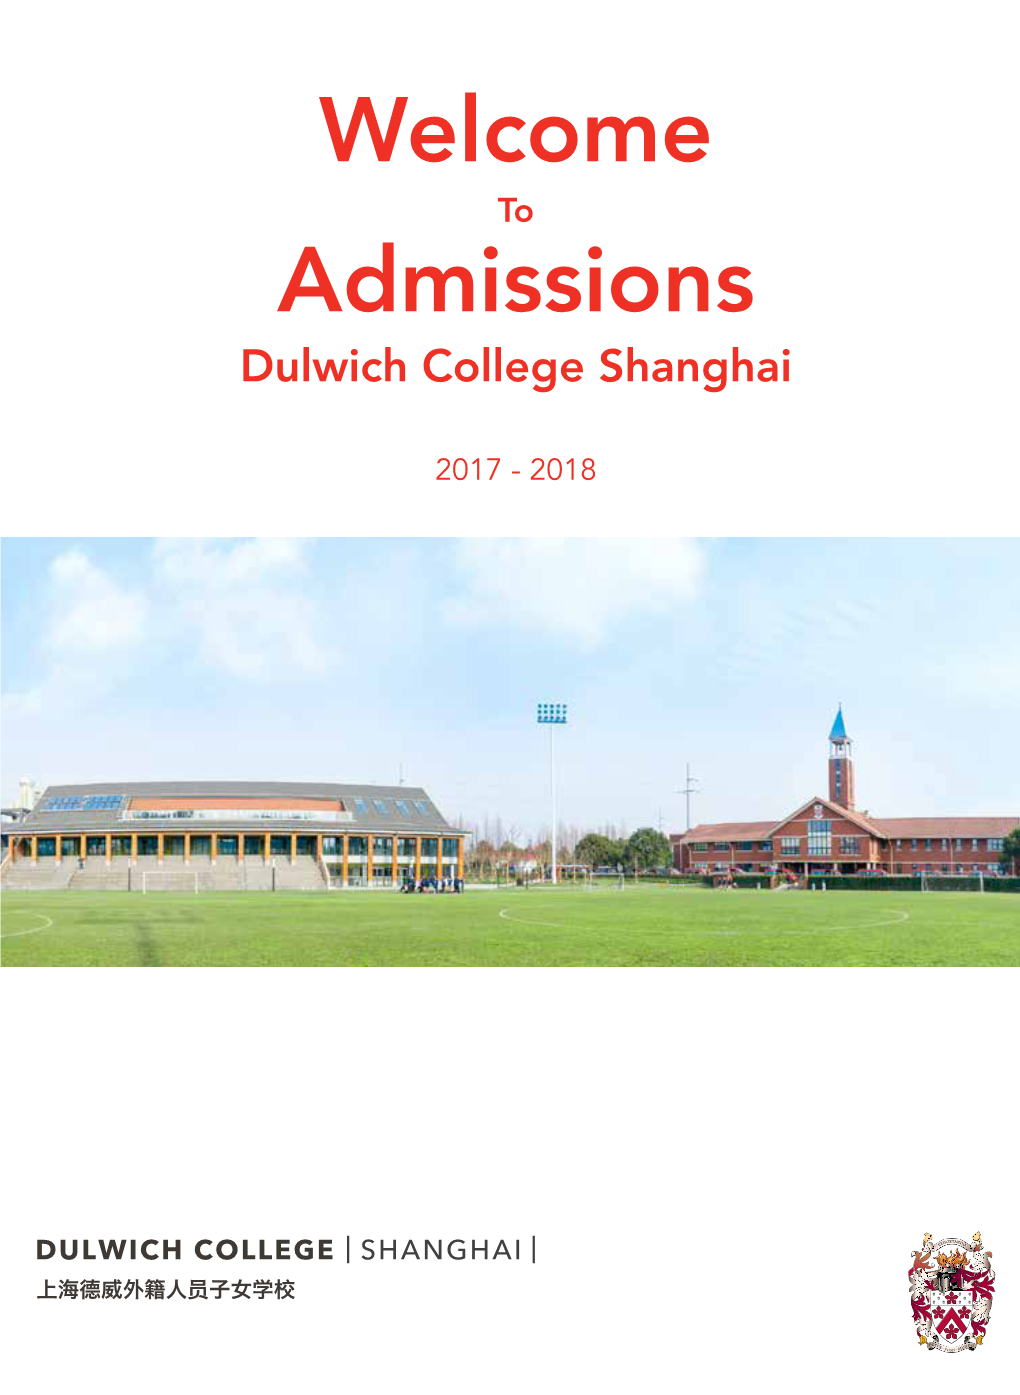 Welcome Admissions